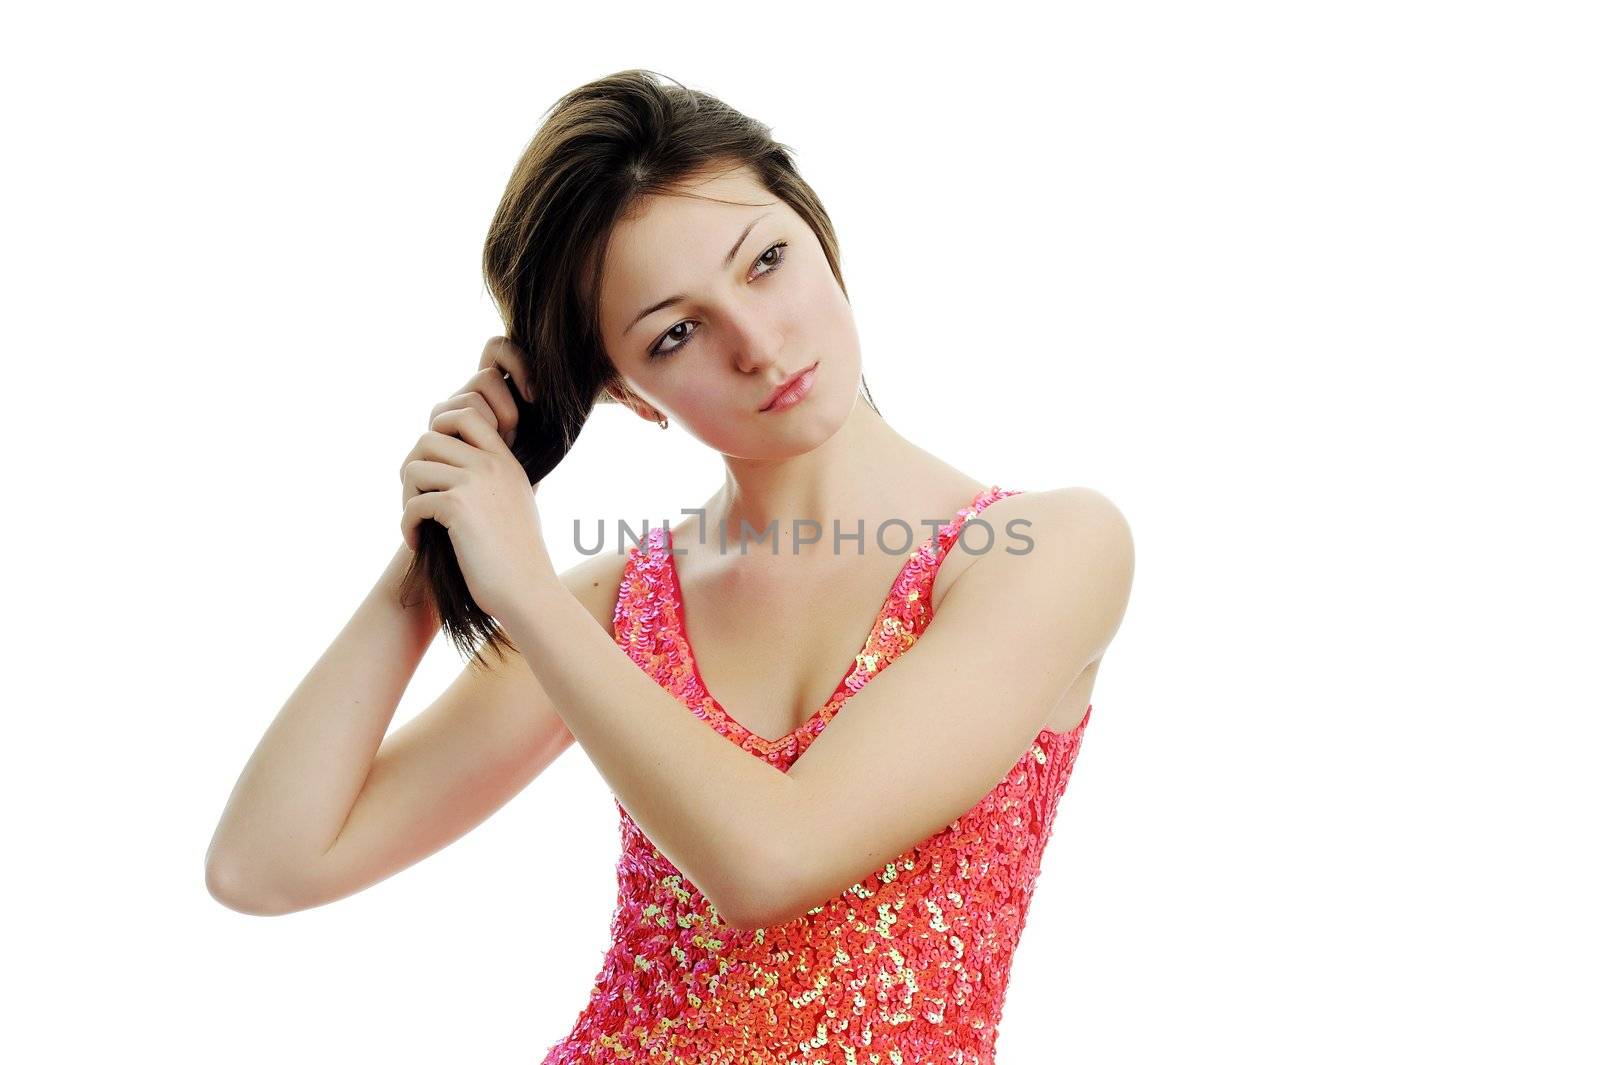 An image of a young nice girl in a dress